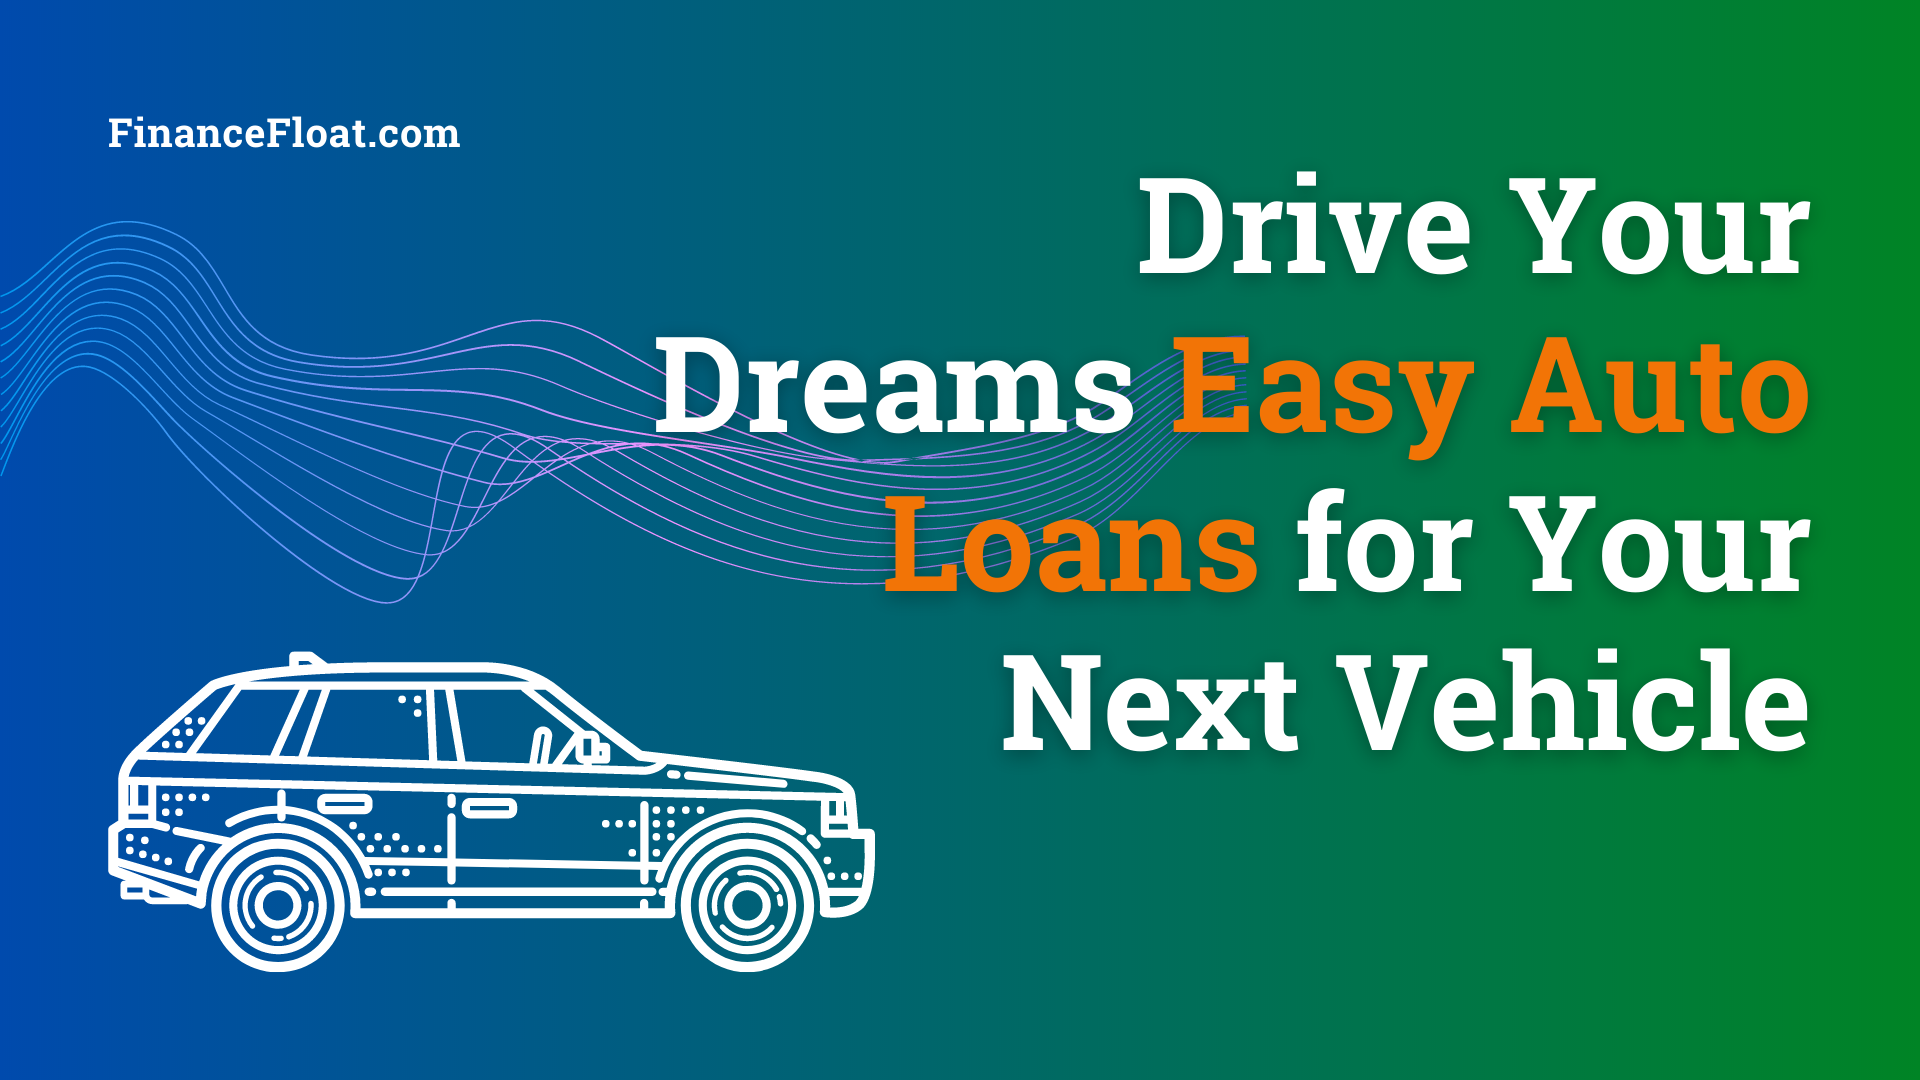 Drive Your Dreams Easy Auto Loans for Your Next Vehicle